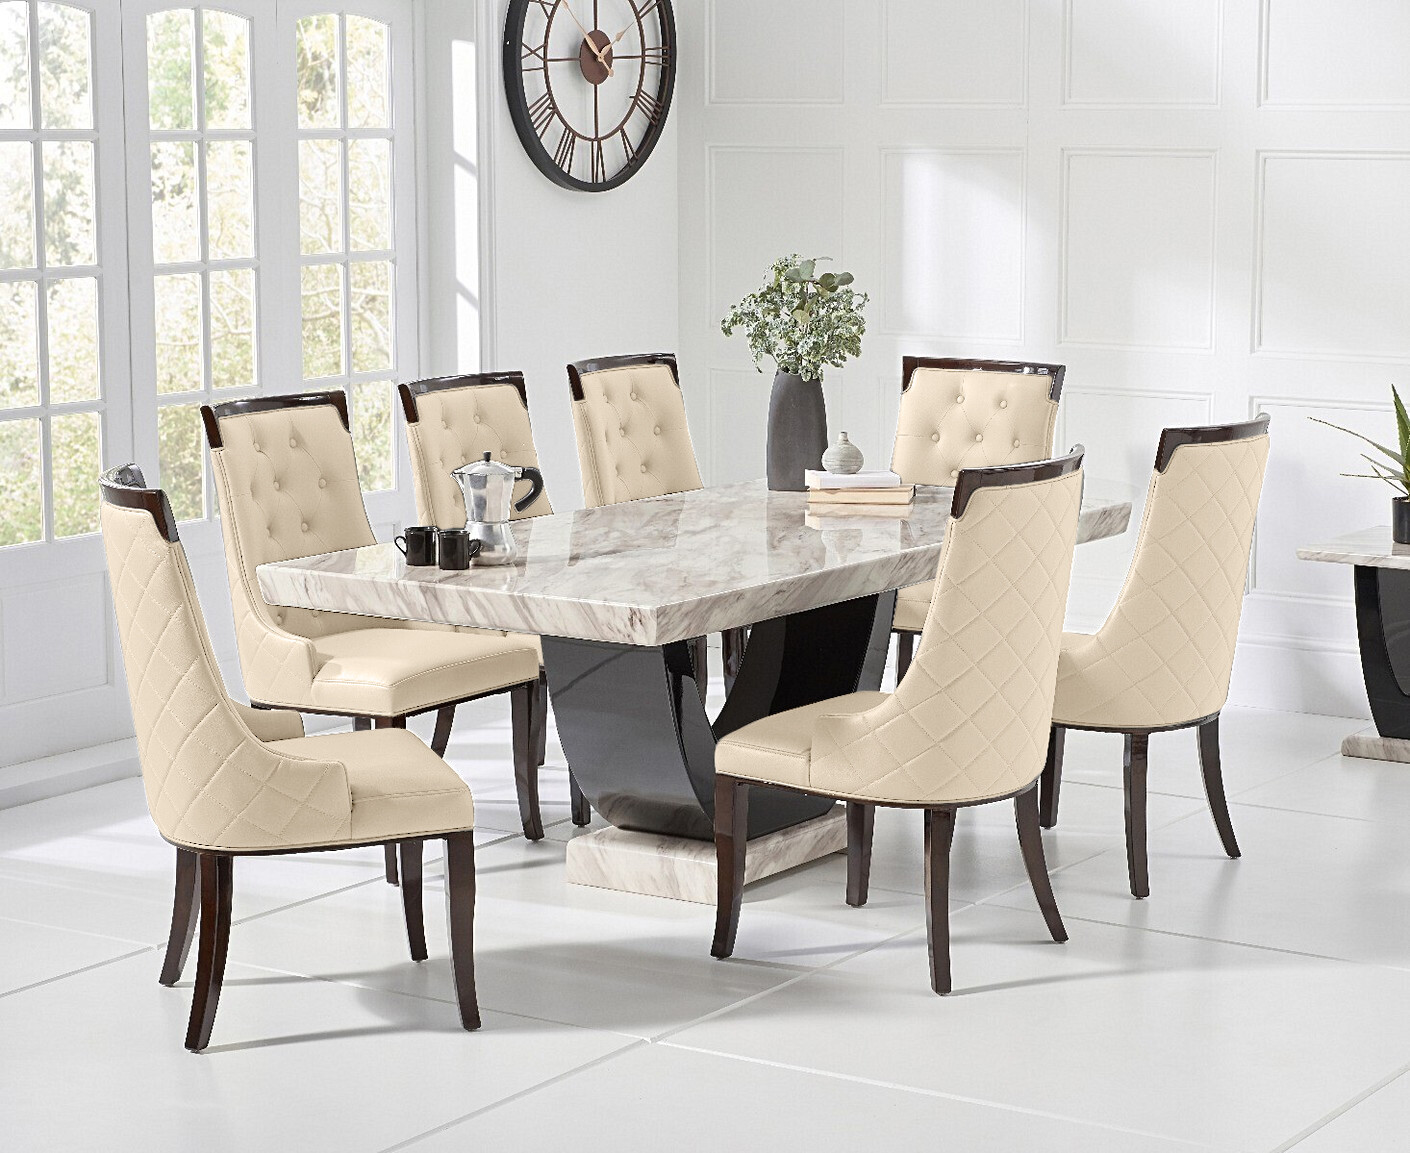 Photo 2 of Novara 200cm cream and black pedestal marble dining table with 6 cream francesca chairs